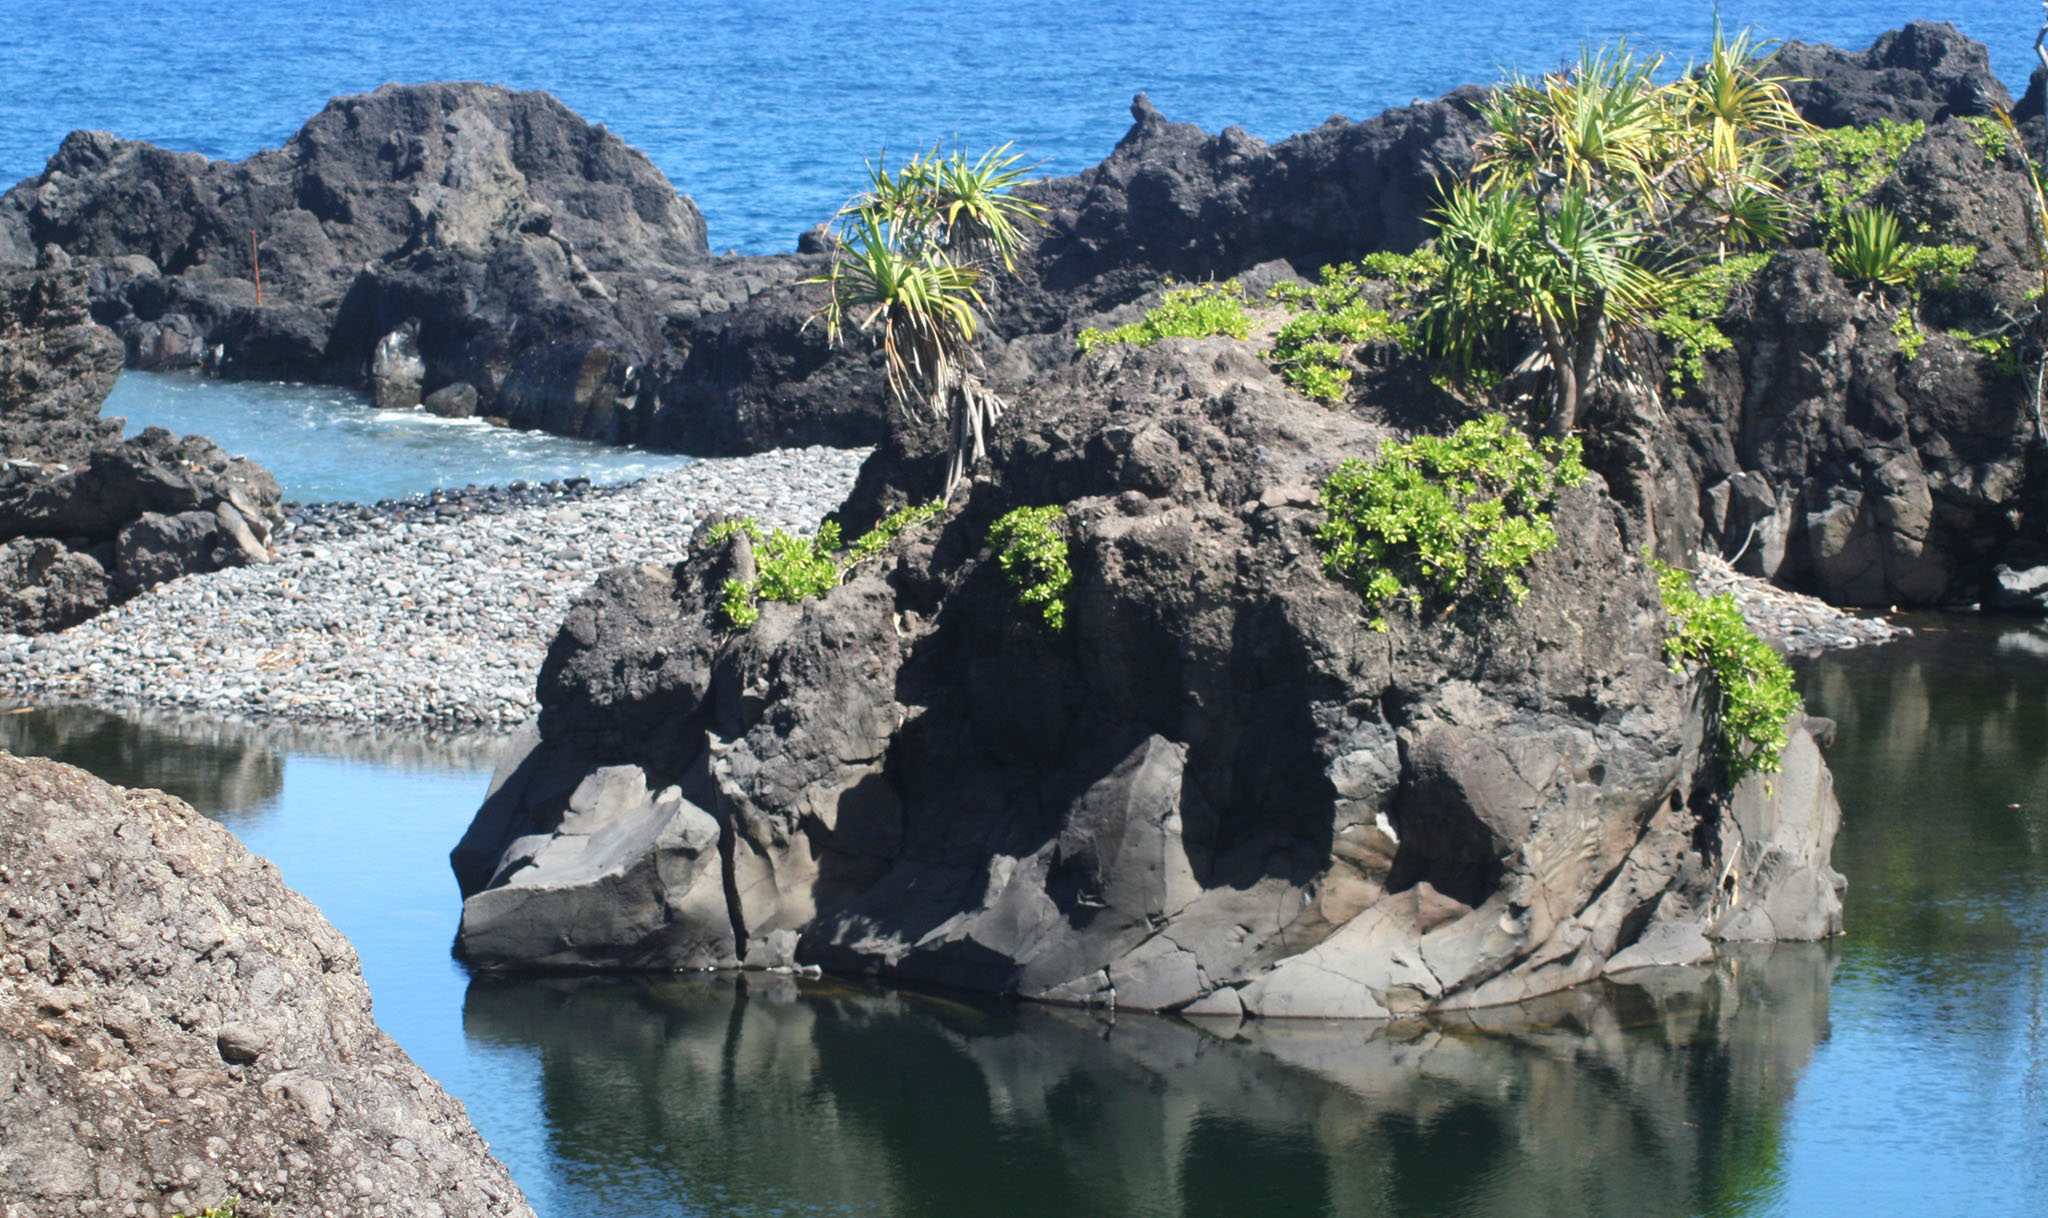 The hala Capped lava island can serve as a leaping point in proper conditions.